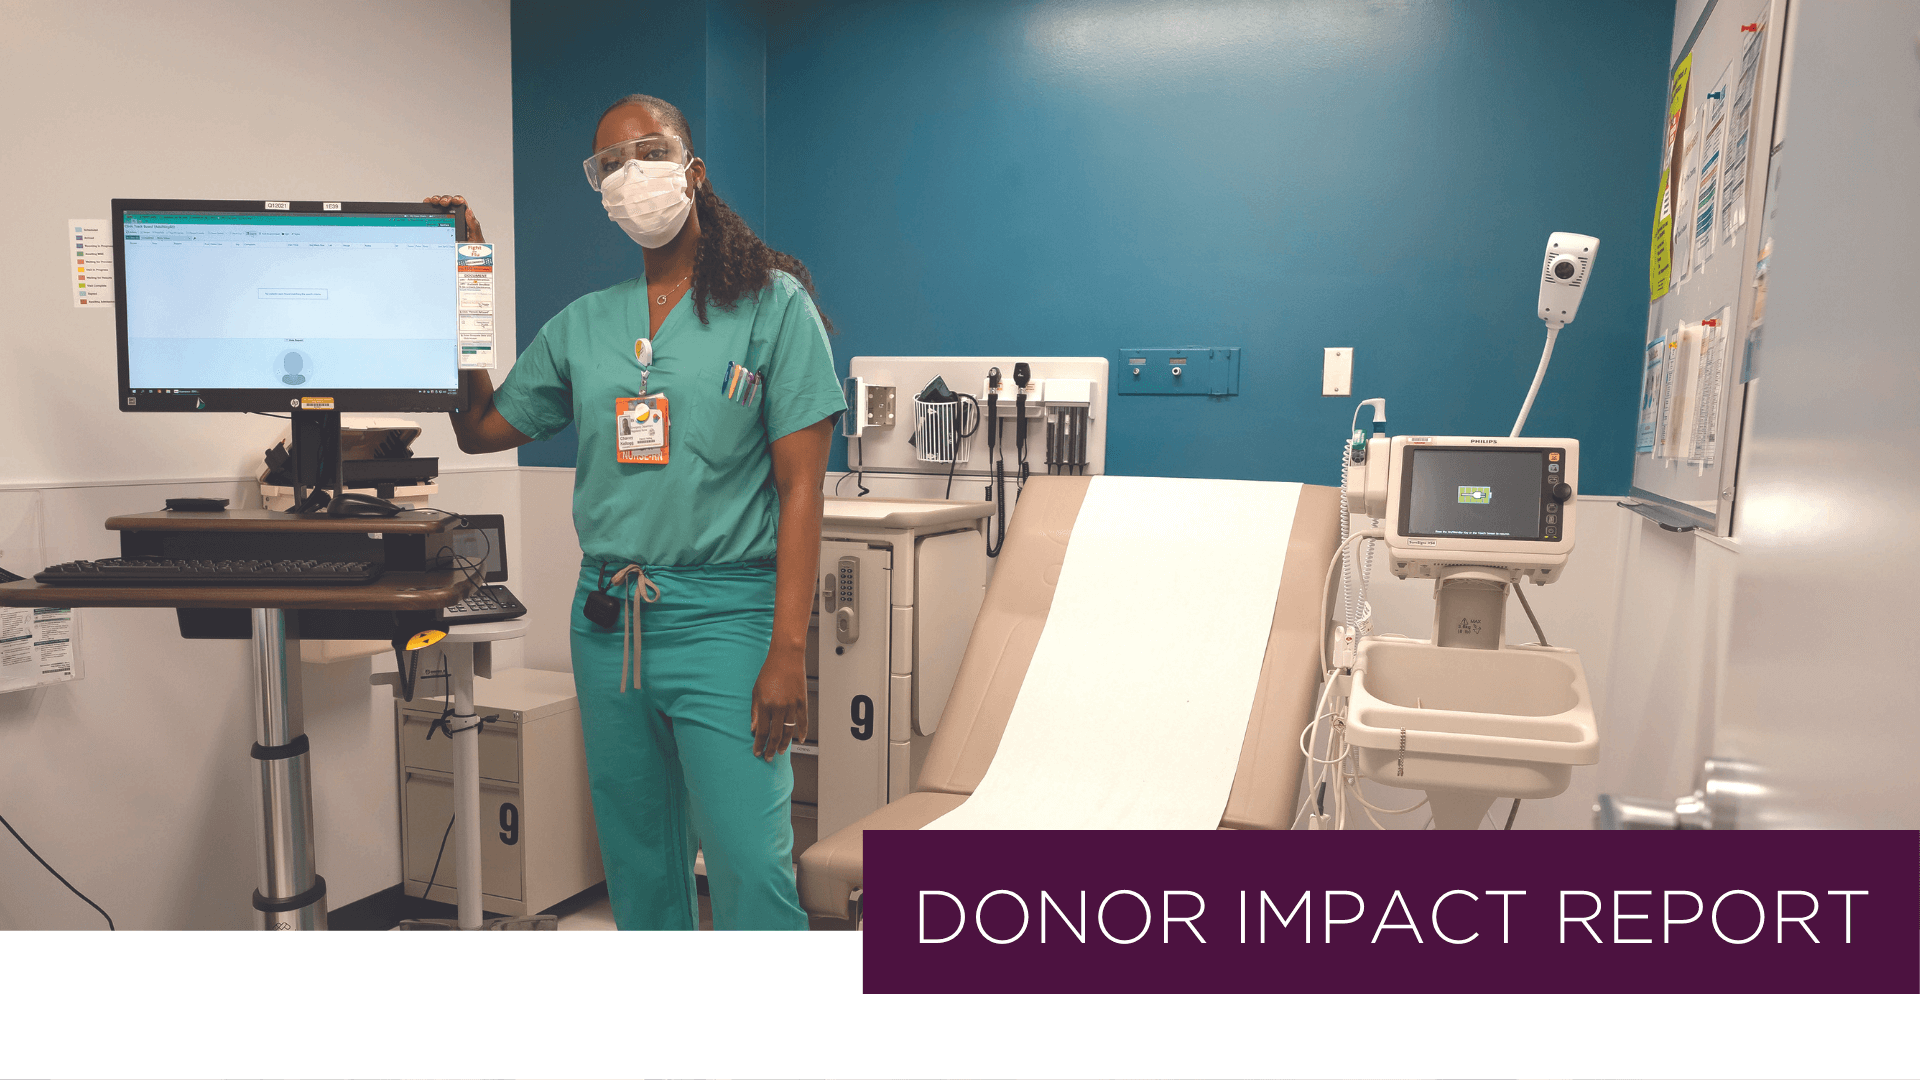 DONOR IMPACT REPORT